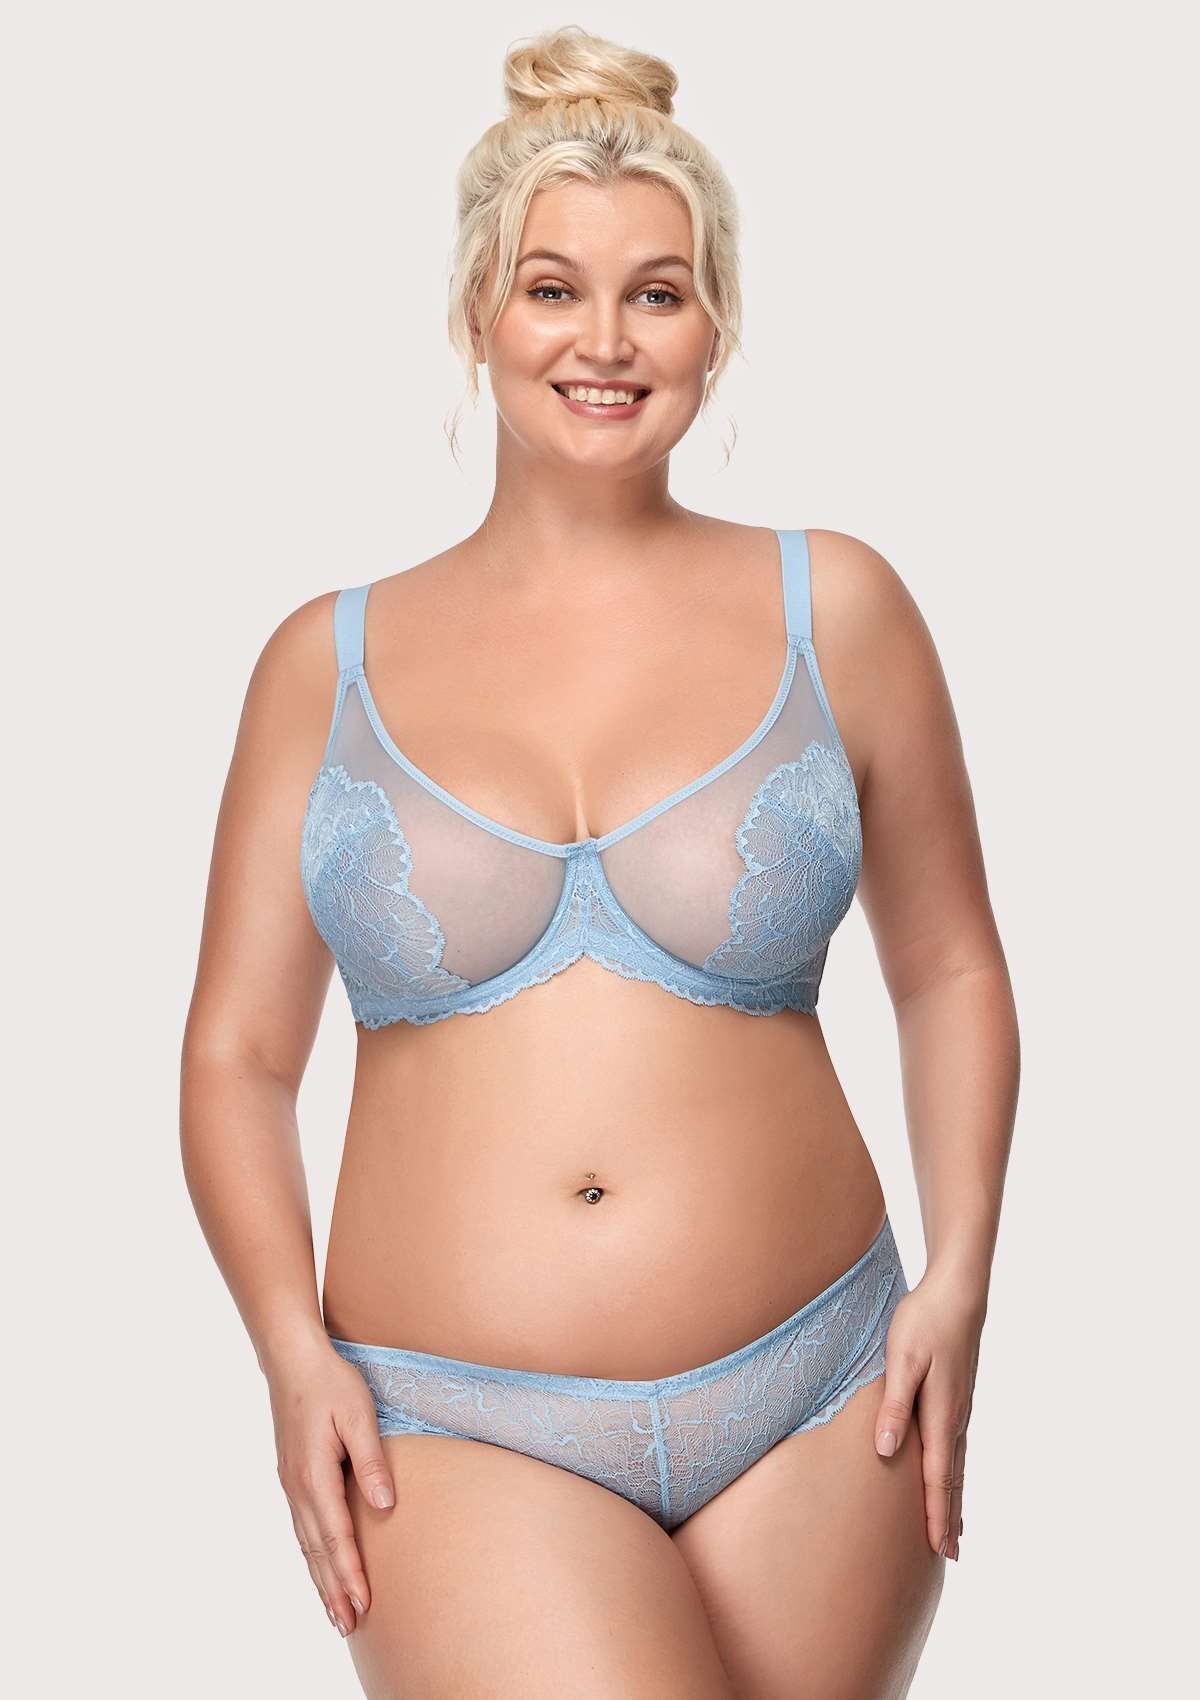 HSIA Blossom Full Coverage Supportive Unlined Underwire Bra Set - Storm Blue / 38 / C